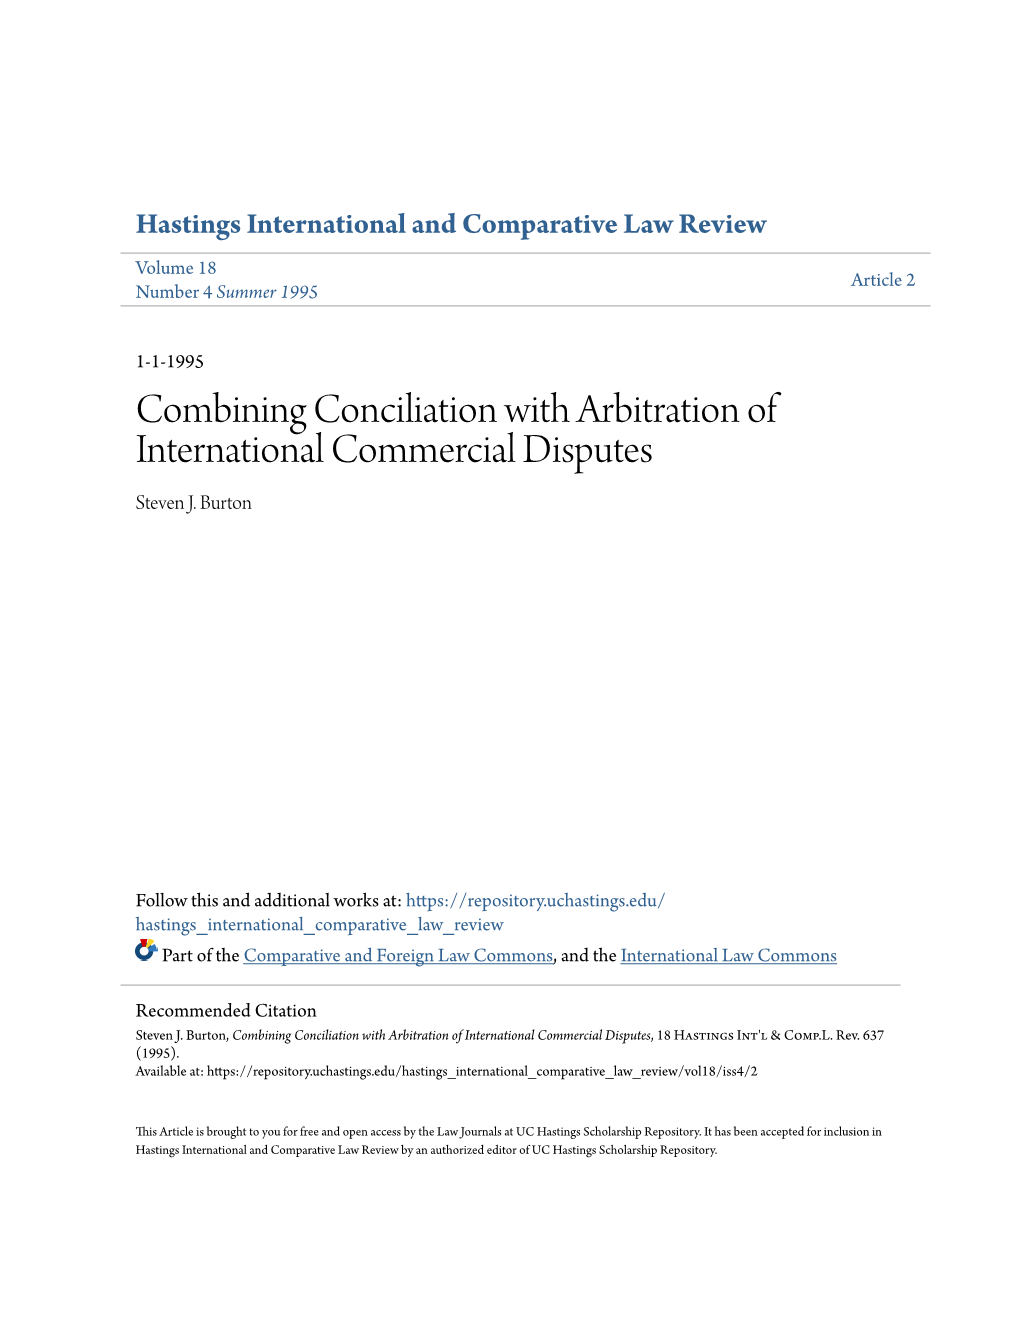 Combining Conciliation with Arbitration of International Commercial Disputes Steven J